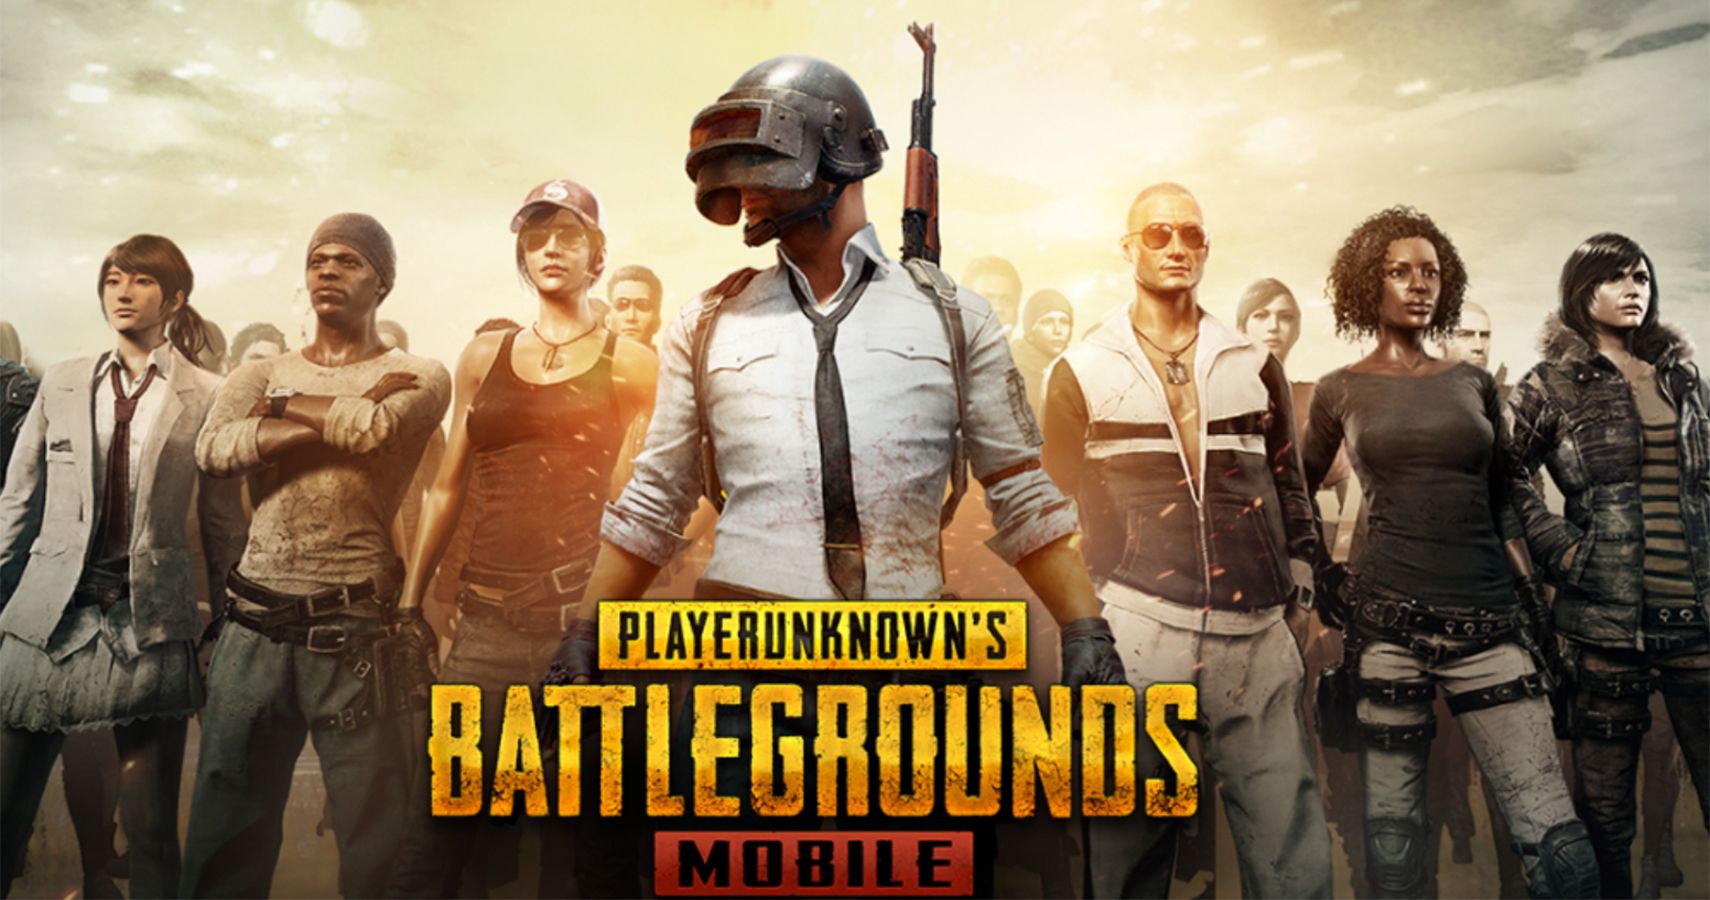 How To Install Pubg Mobile On Pc